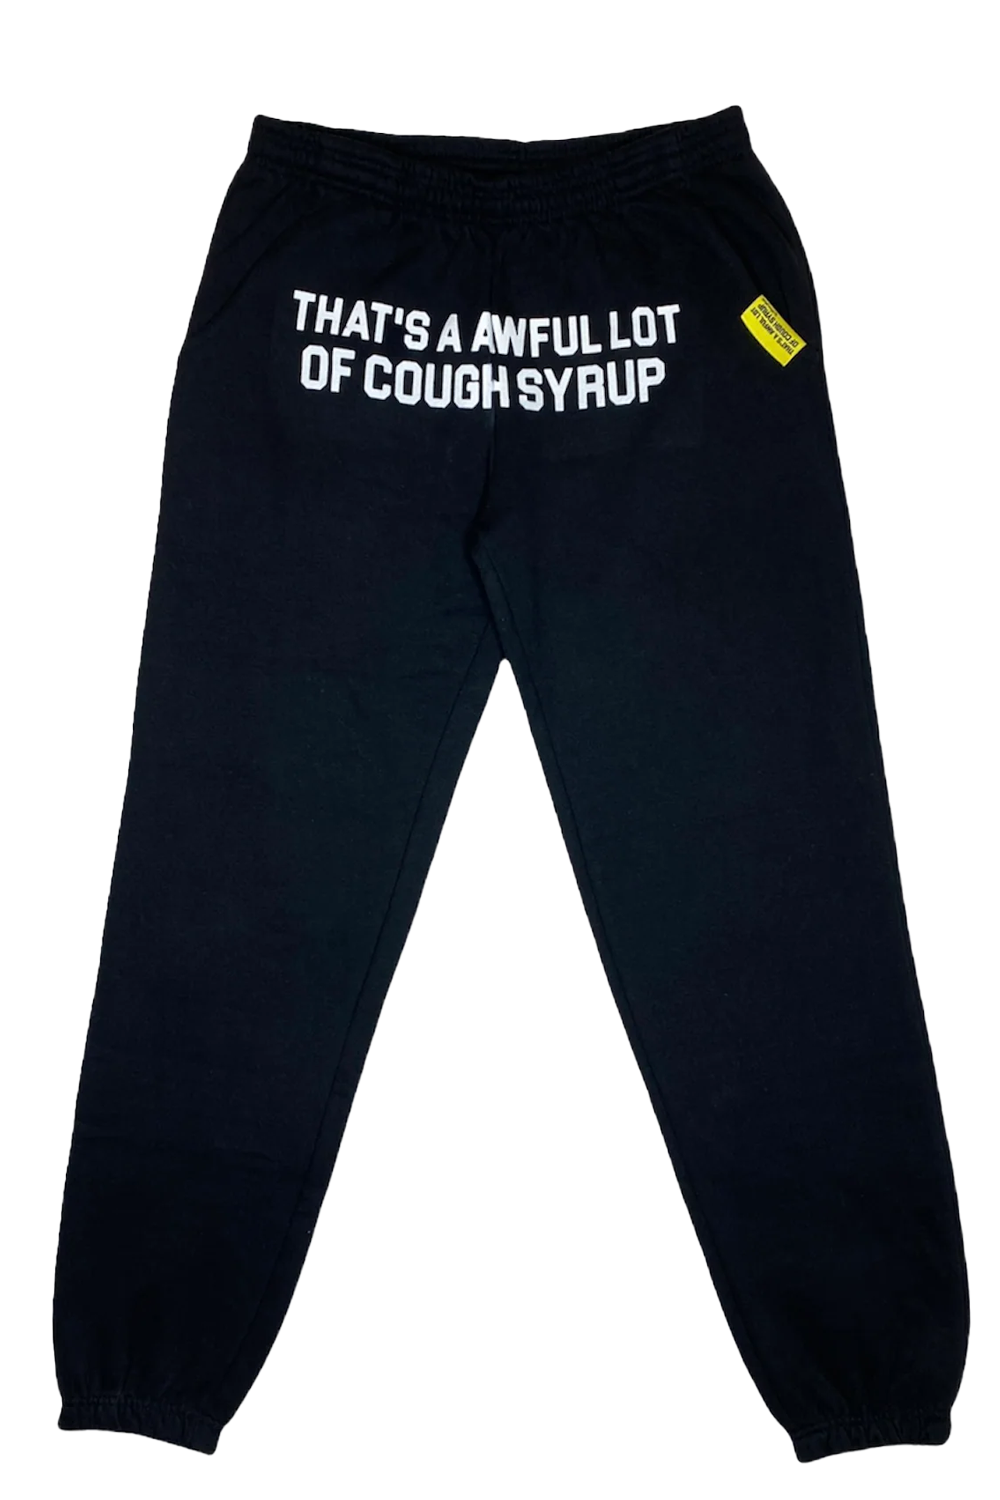 That's An A Awful Lot of Cough Syrup Sweatpants Black (Classic-Cough-S ...